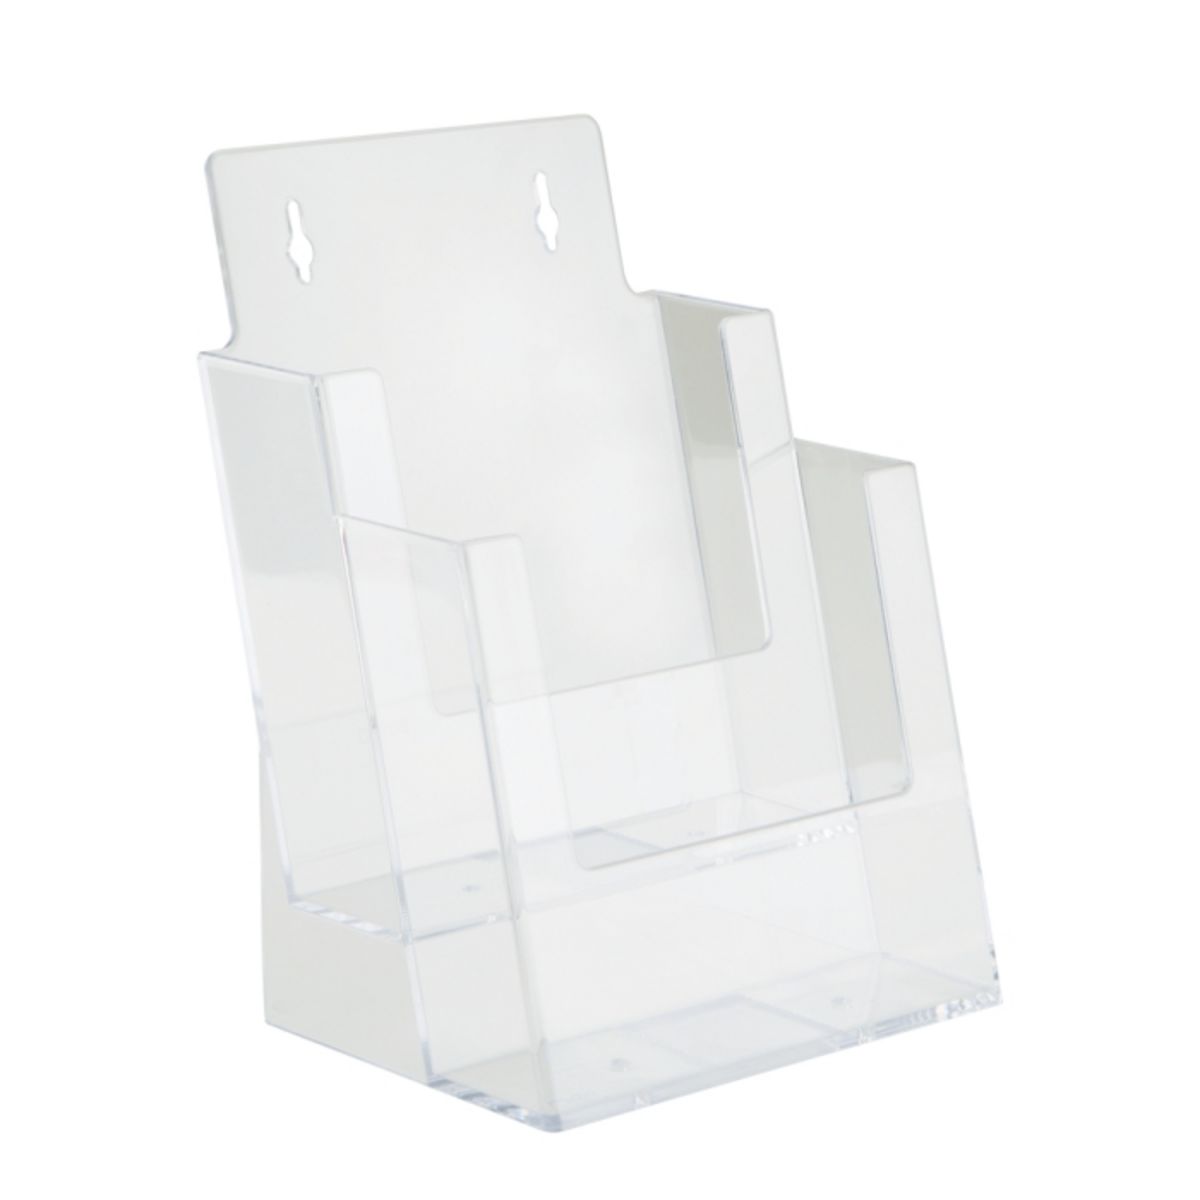 A5 Two Tier Leaflet Holder Portrait Counterstanding.png